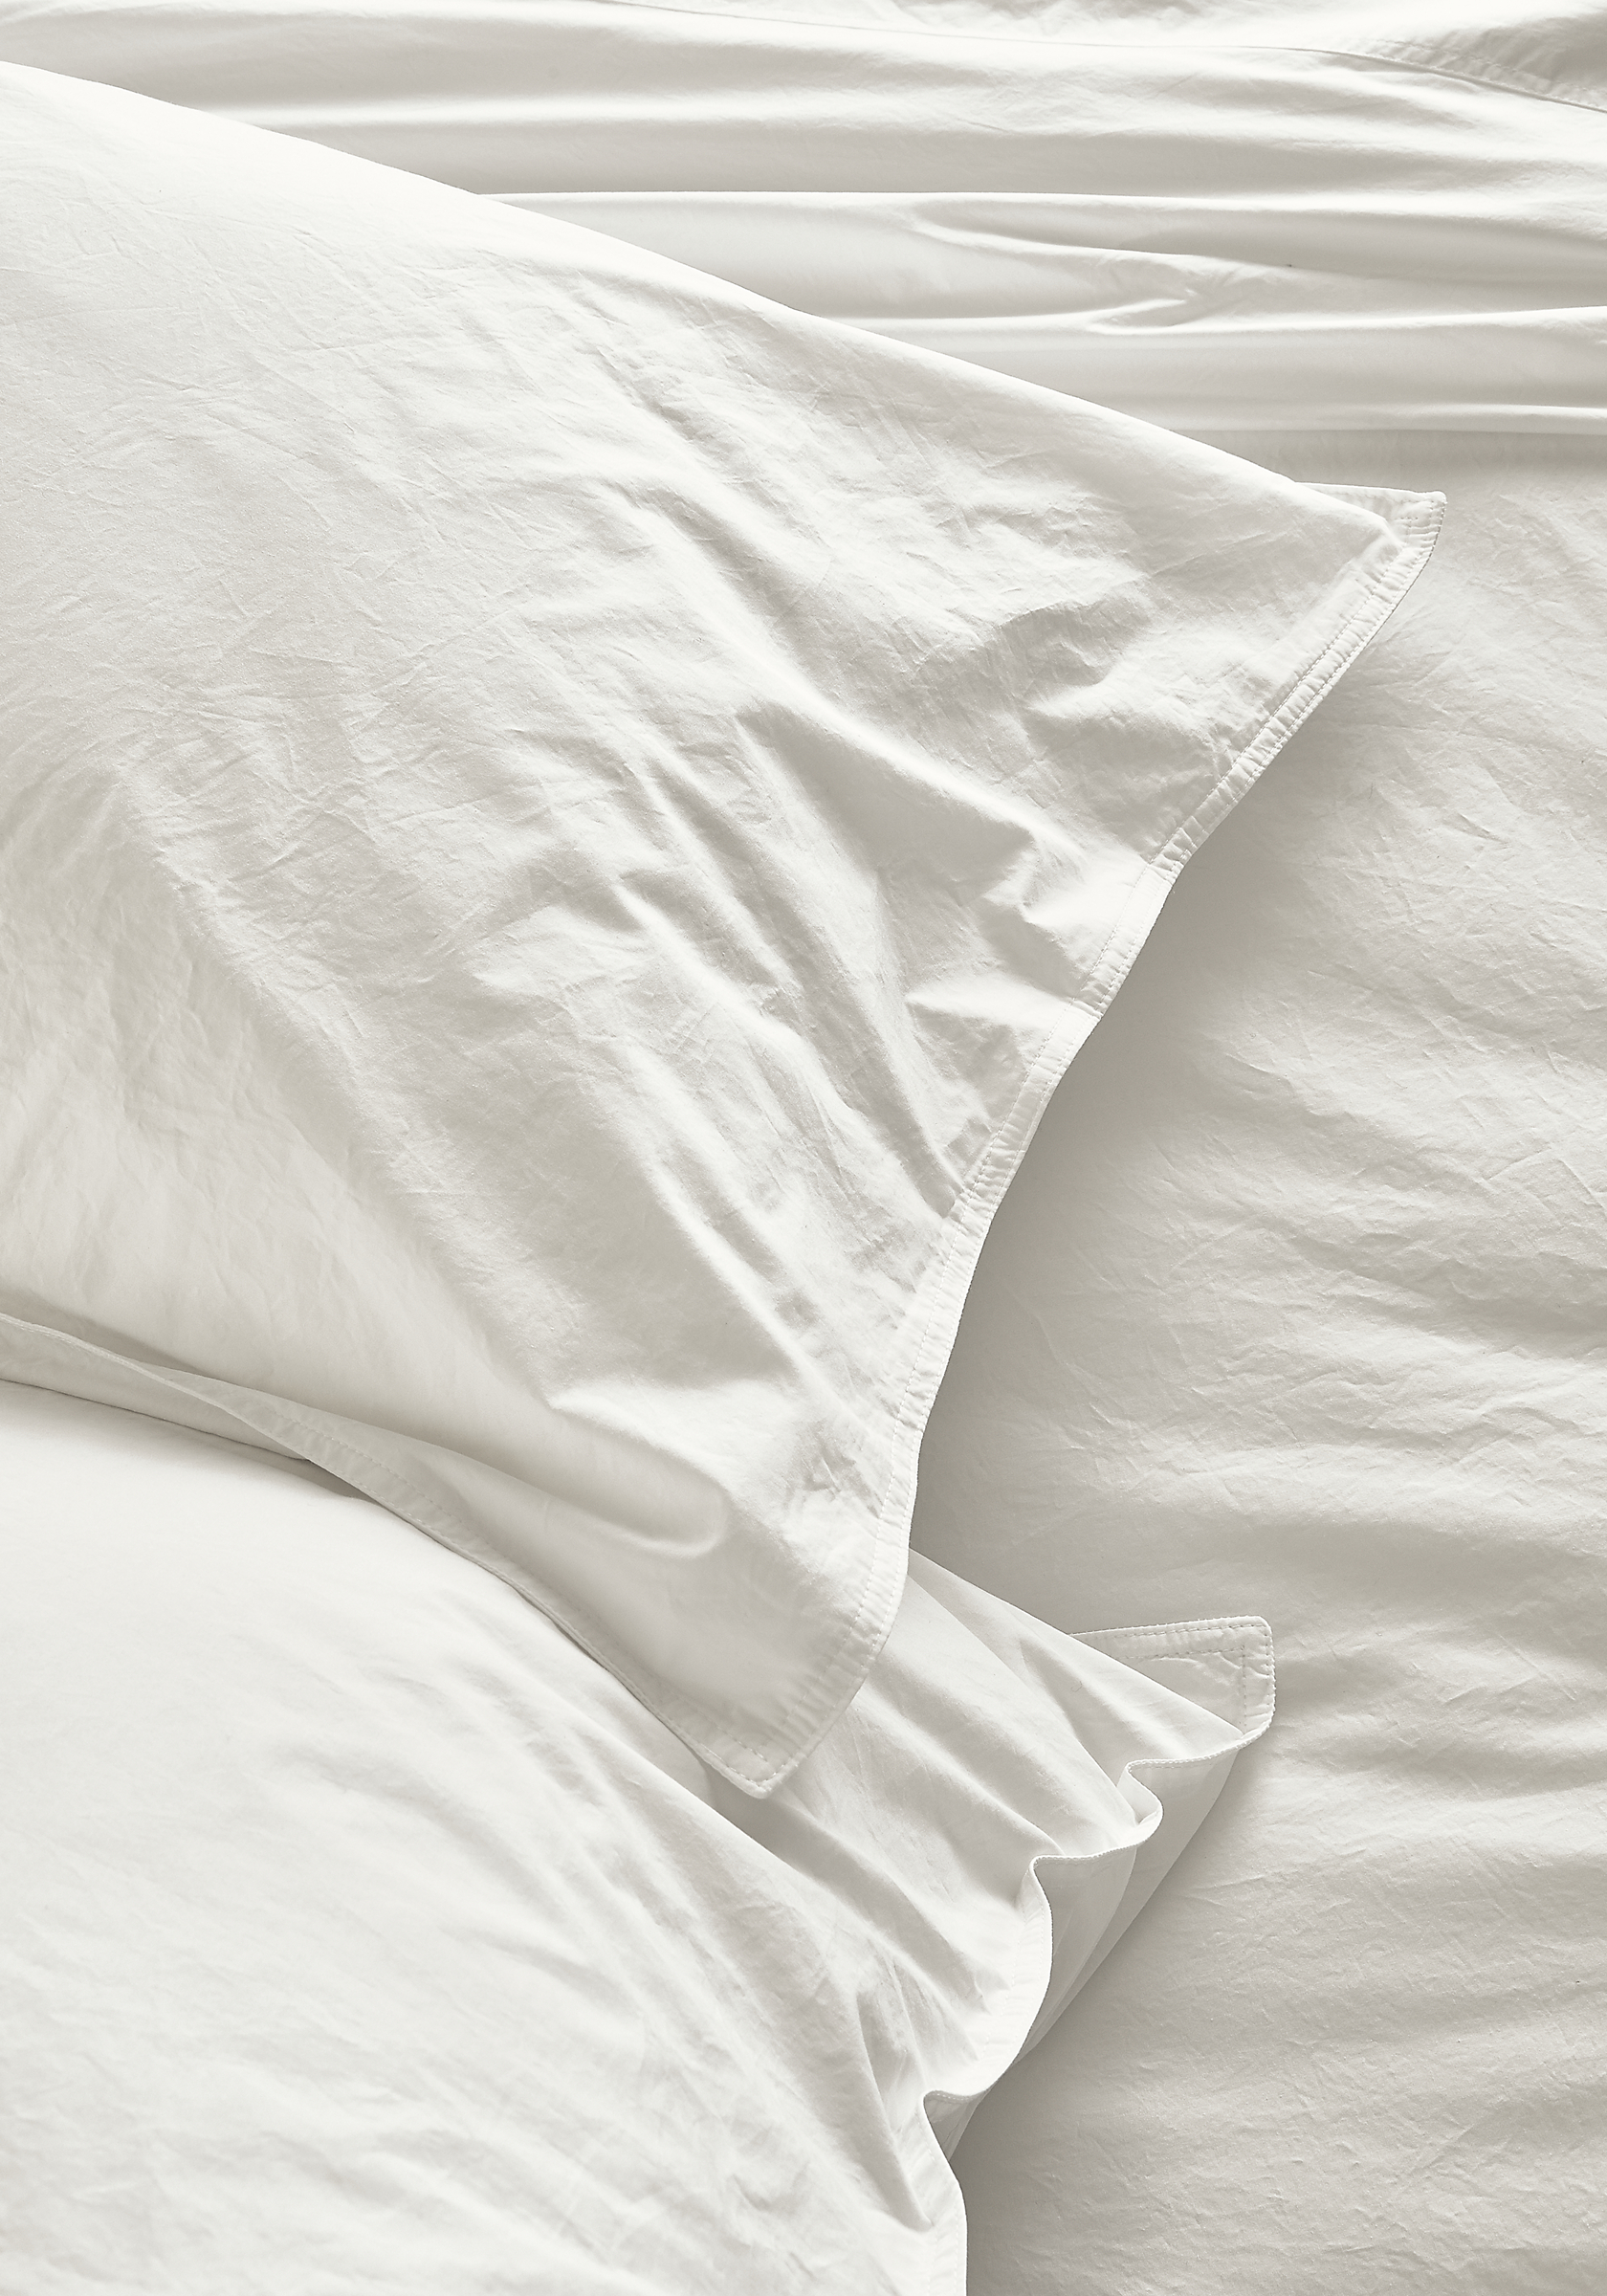 Detail view of Signature Percale standard sham and fitted sheet in white.